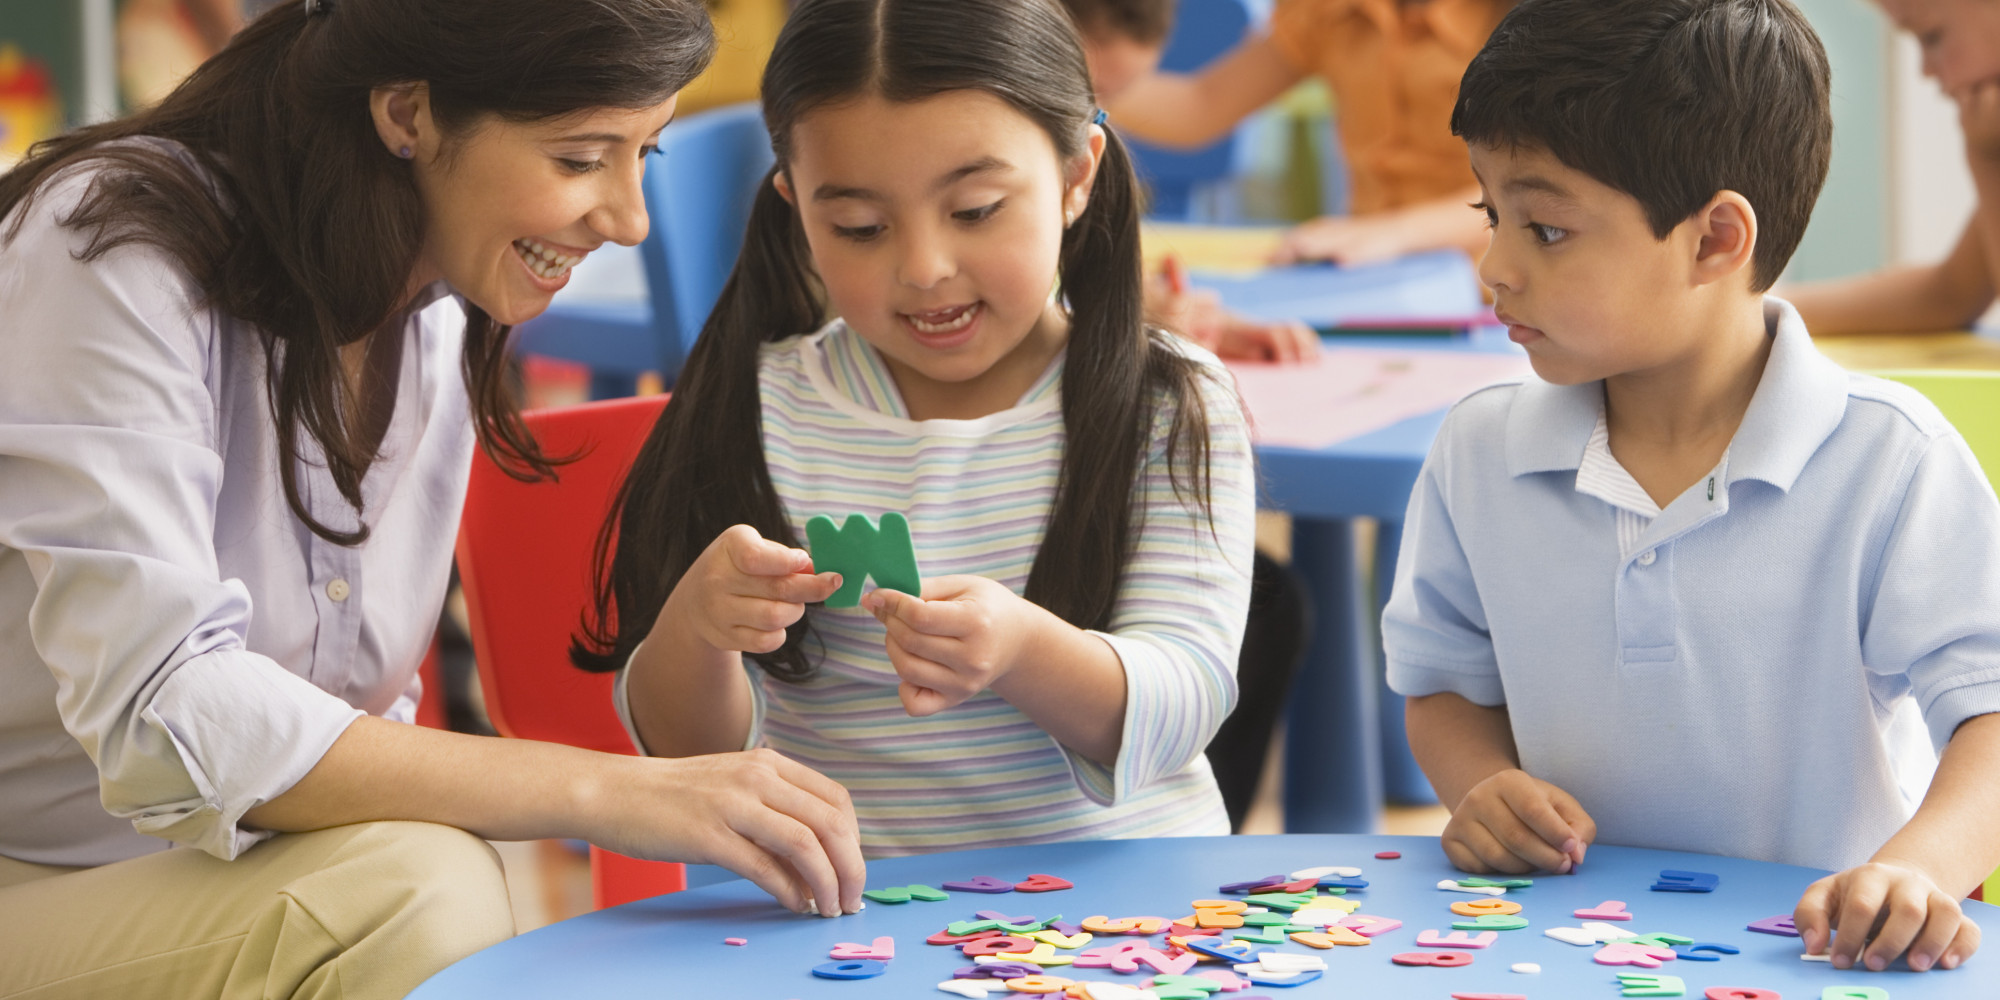  A teacher is sitting at a table with two children, they are playing an educational game with foam letters.